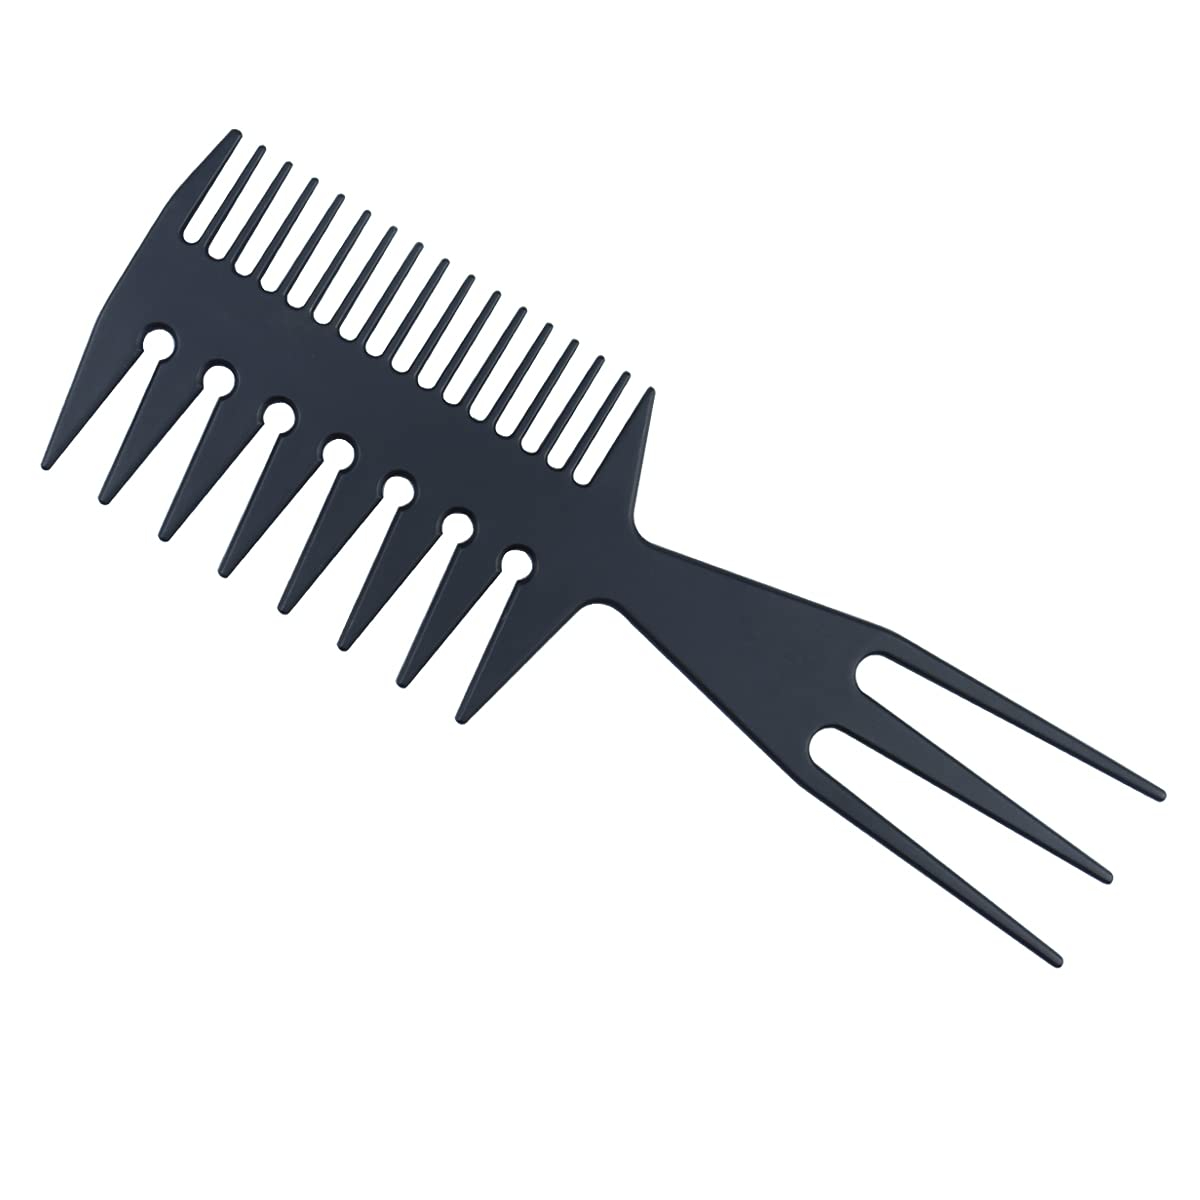 Salon Barbers Comb 3 in 1 Fish Tail Bone Shape Hair Extensions Styling Detangling Coloring Comb for Slicked-back Undercut Mohawk Bowl Cut Quiff